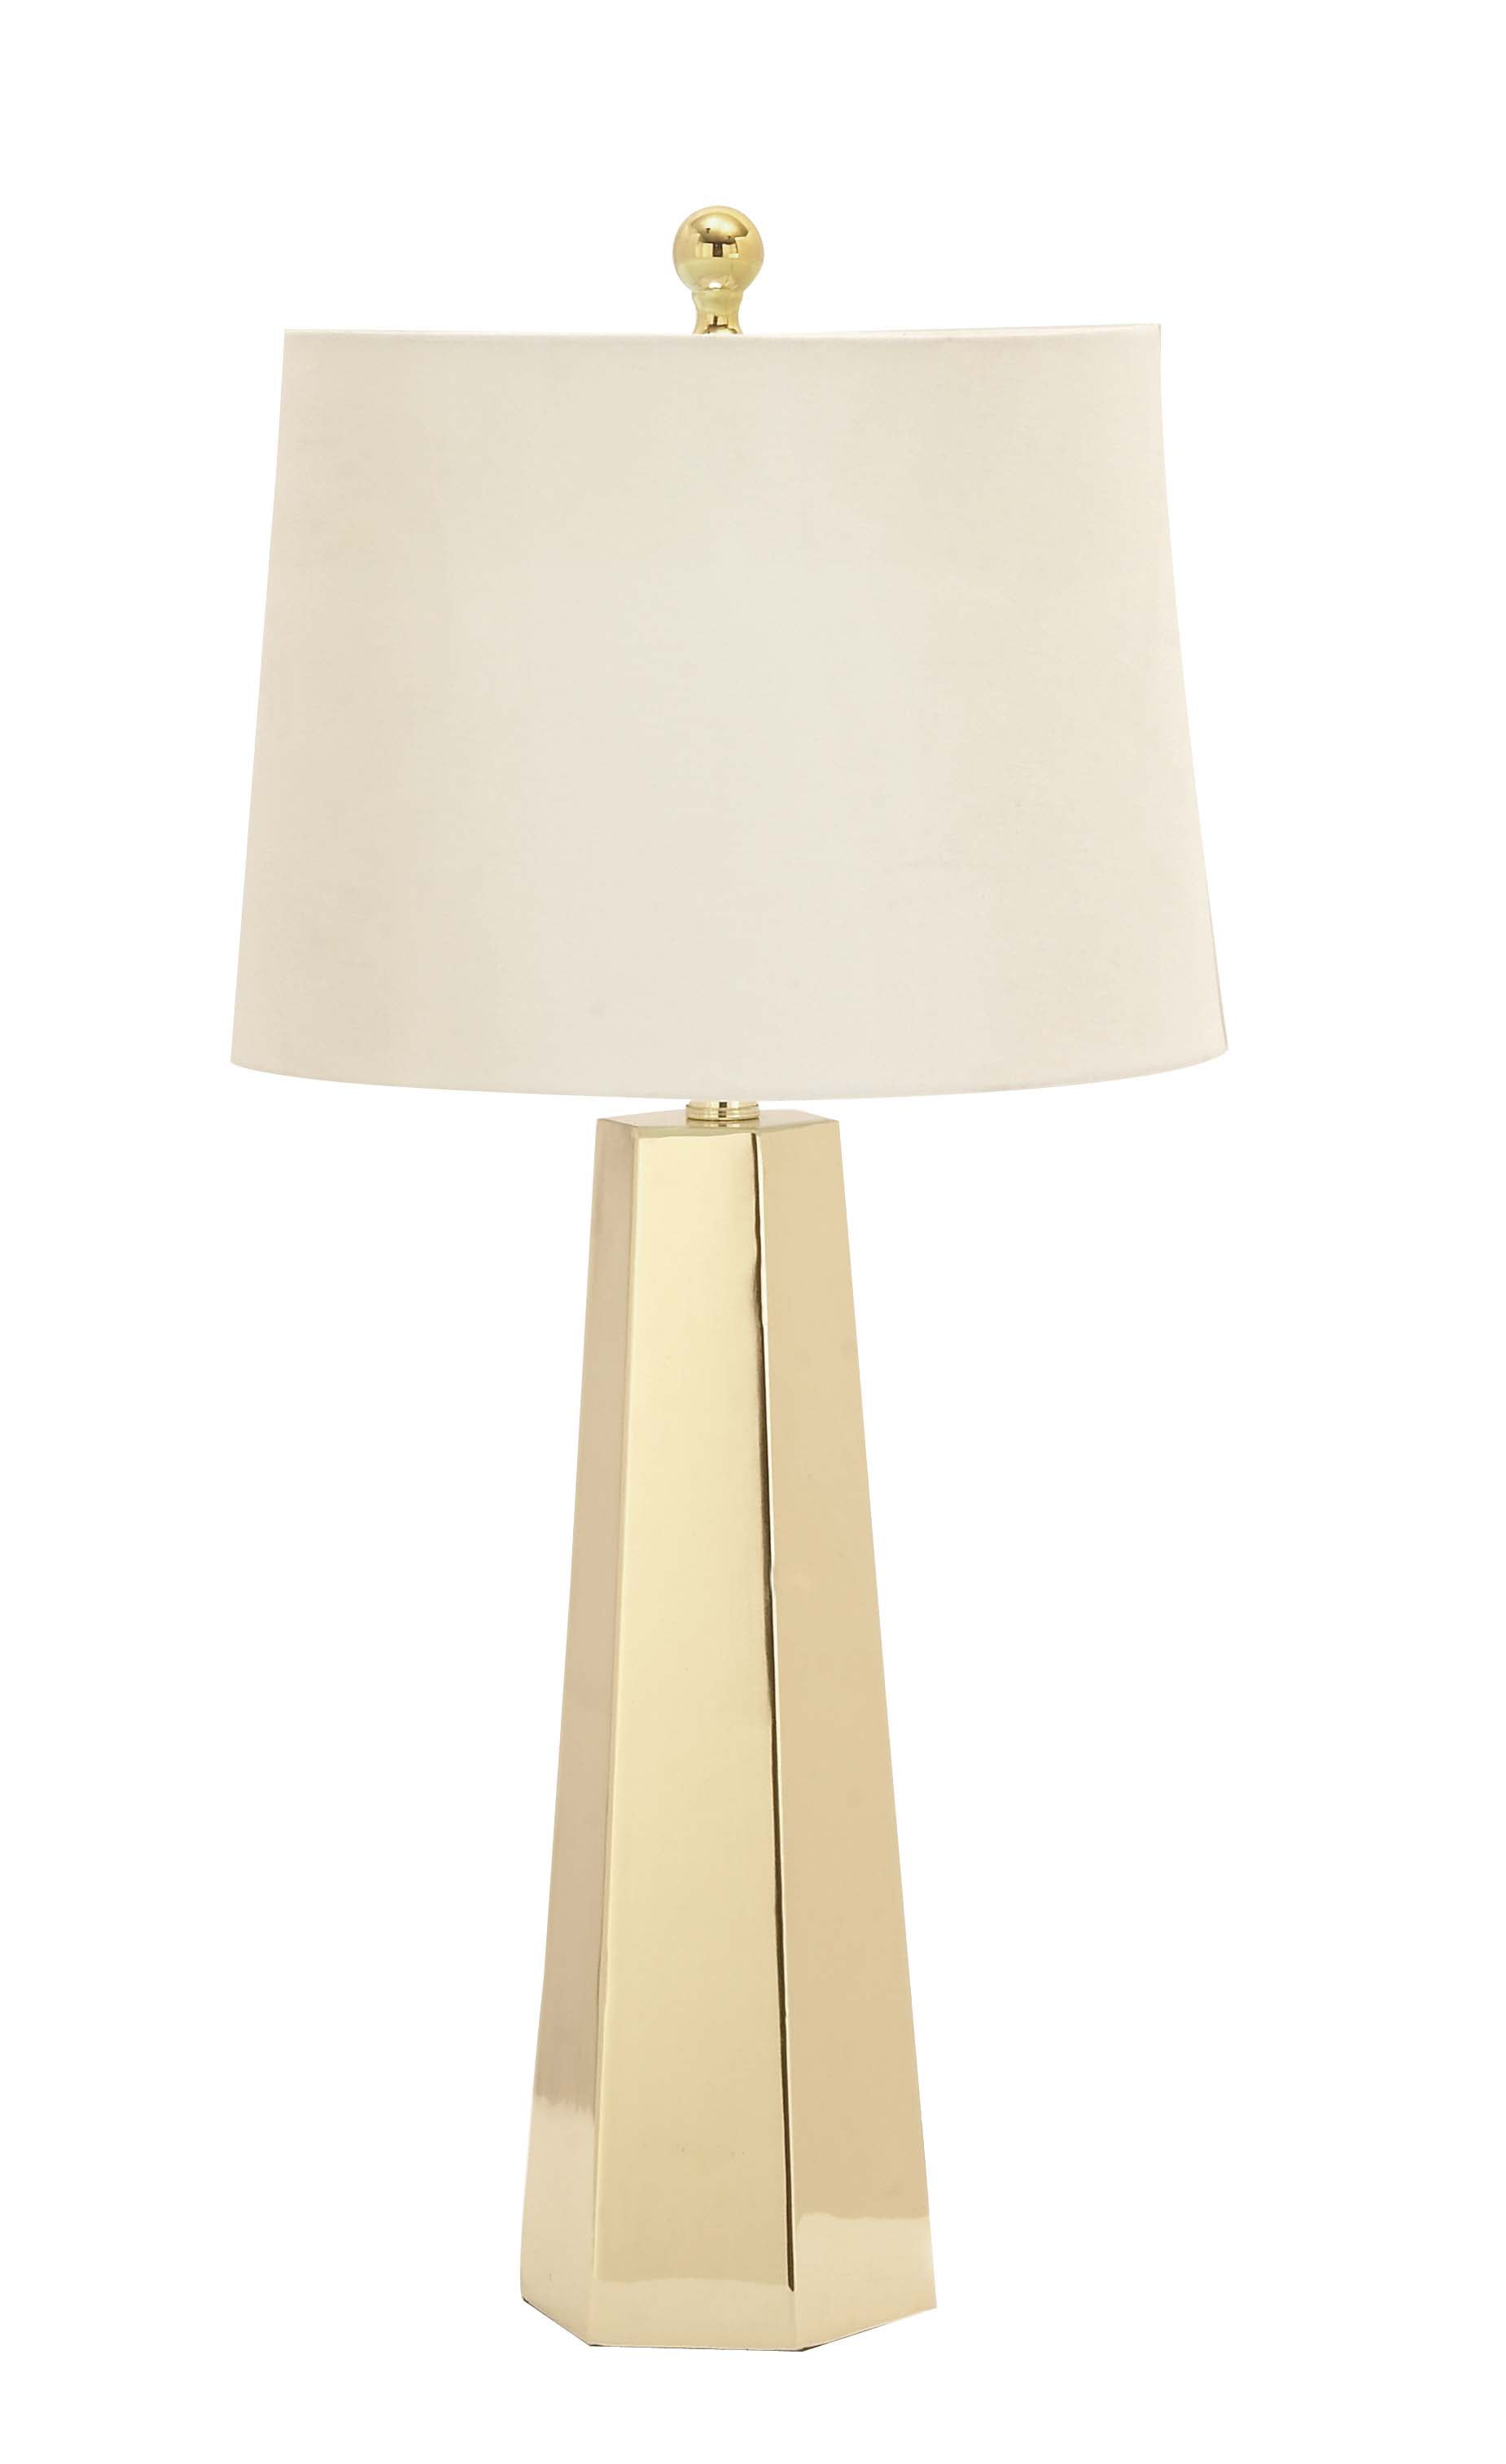 Gold Metal Hexagonal Prism Table Lamps, White Prism Table Lamps